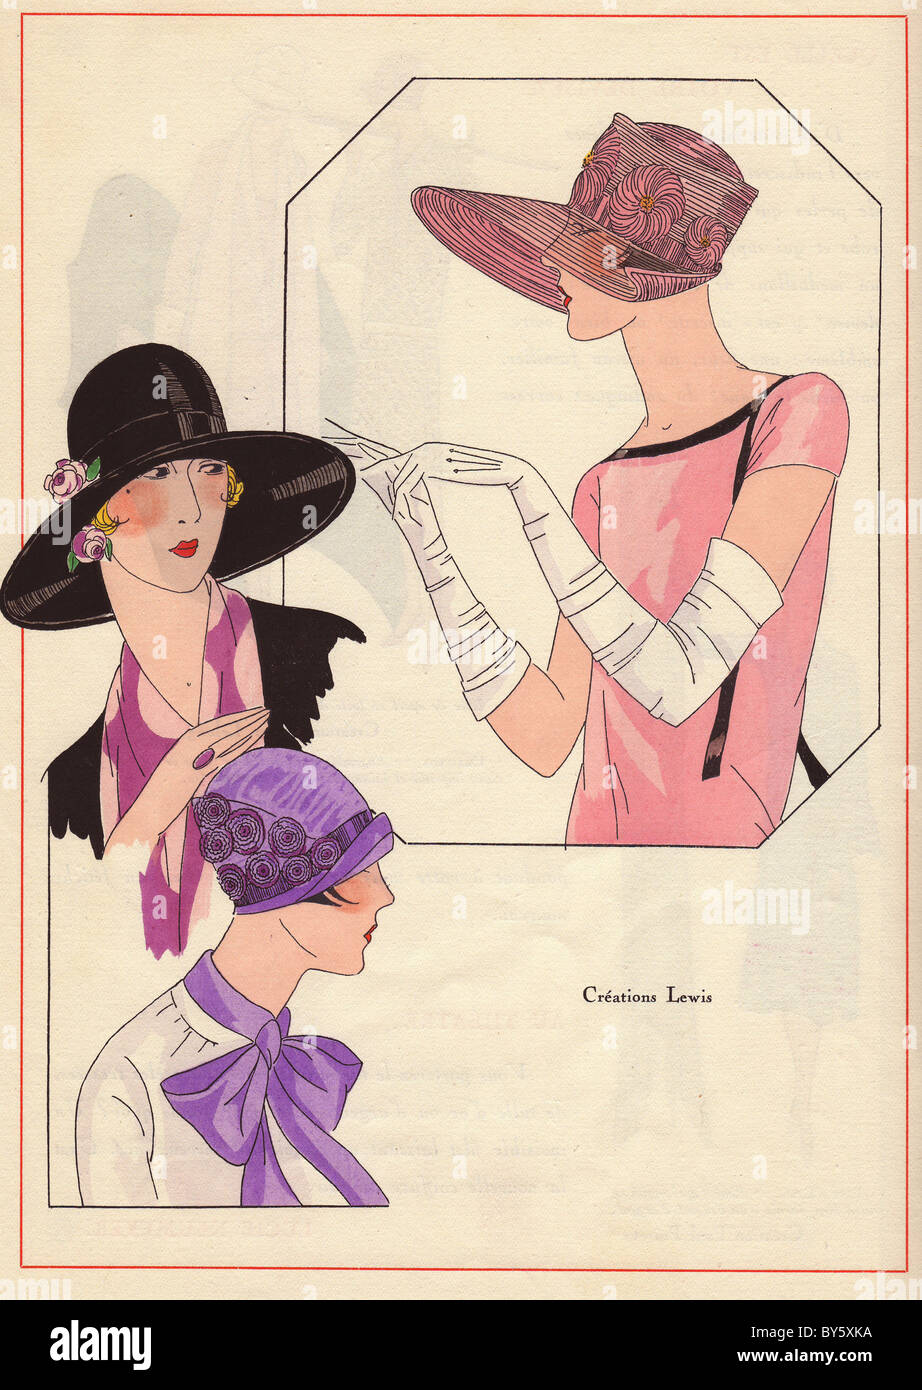 1920s women's hats from AGB: Dusty pink hat with diaphanous brim, black wide-brimmed hat with pink roses, and purple cloche. Stock Photo